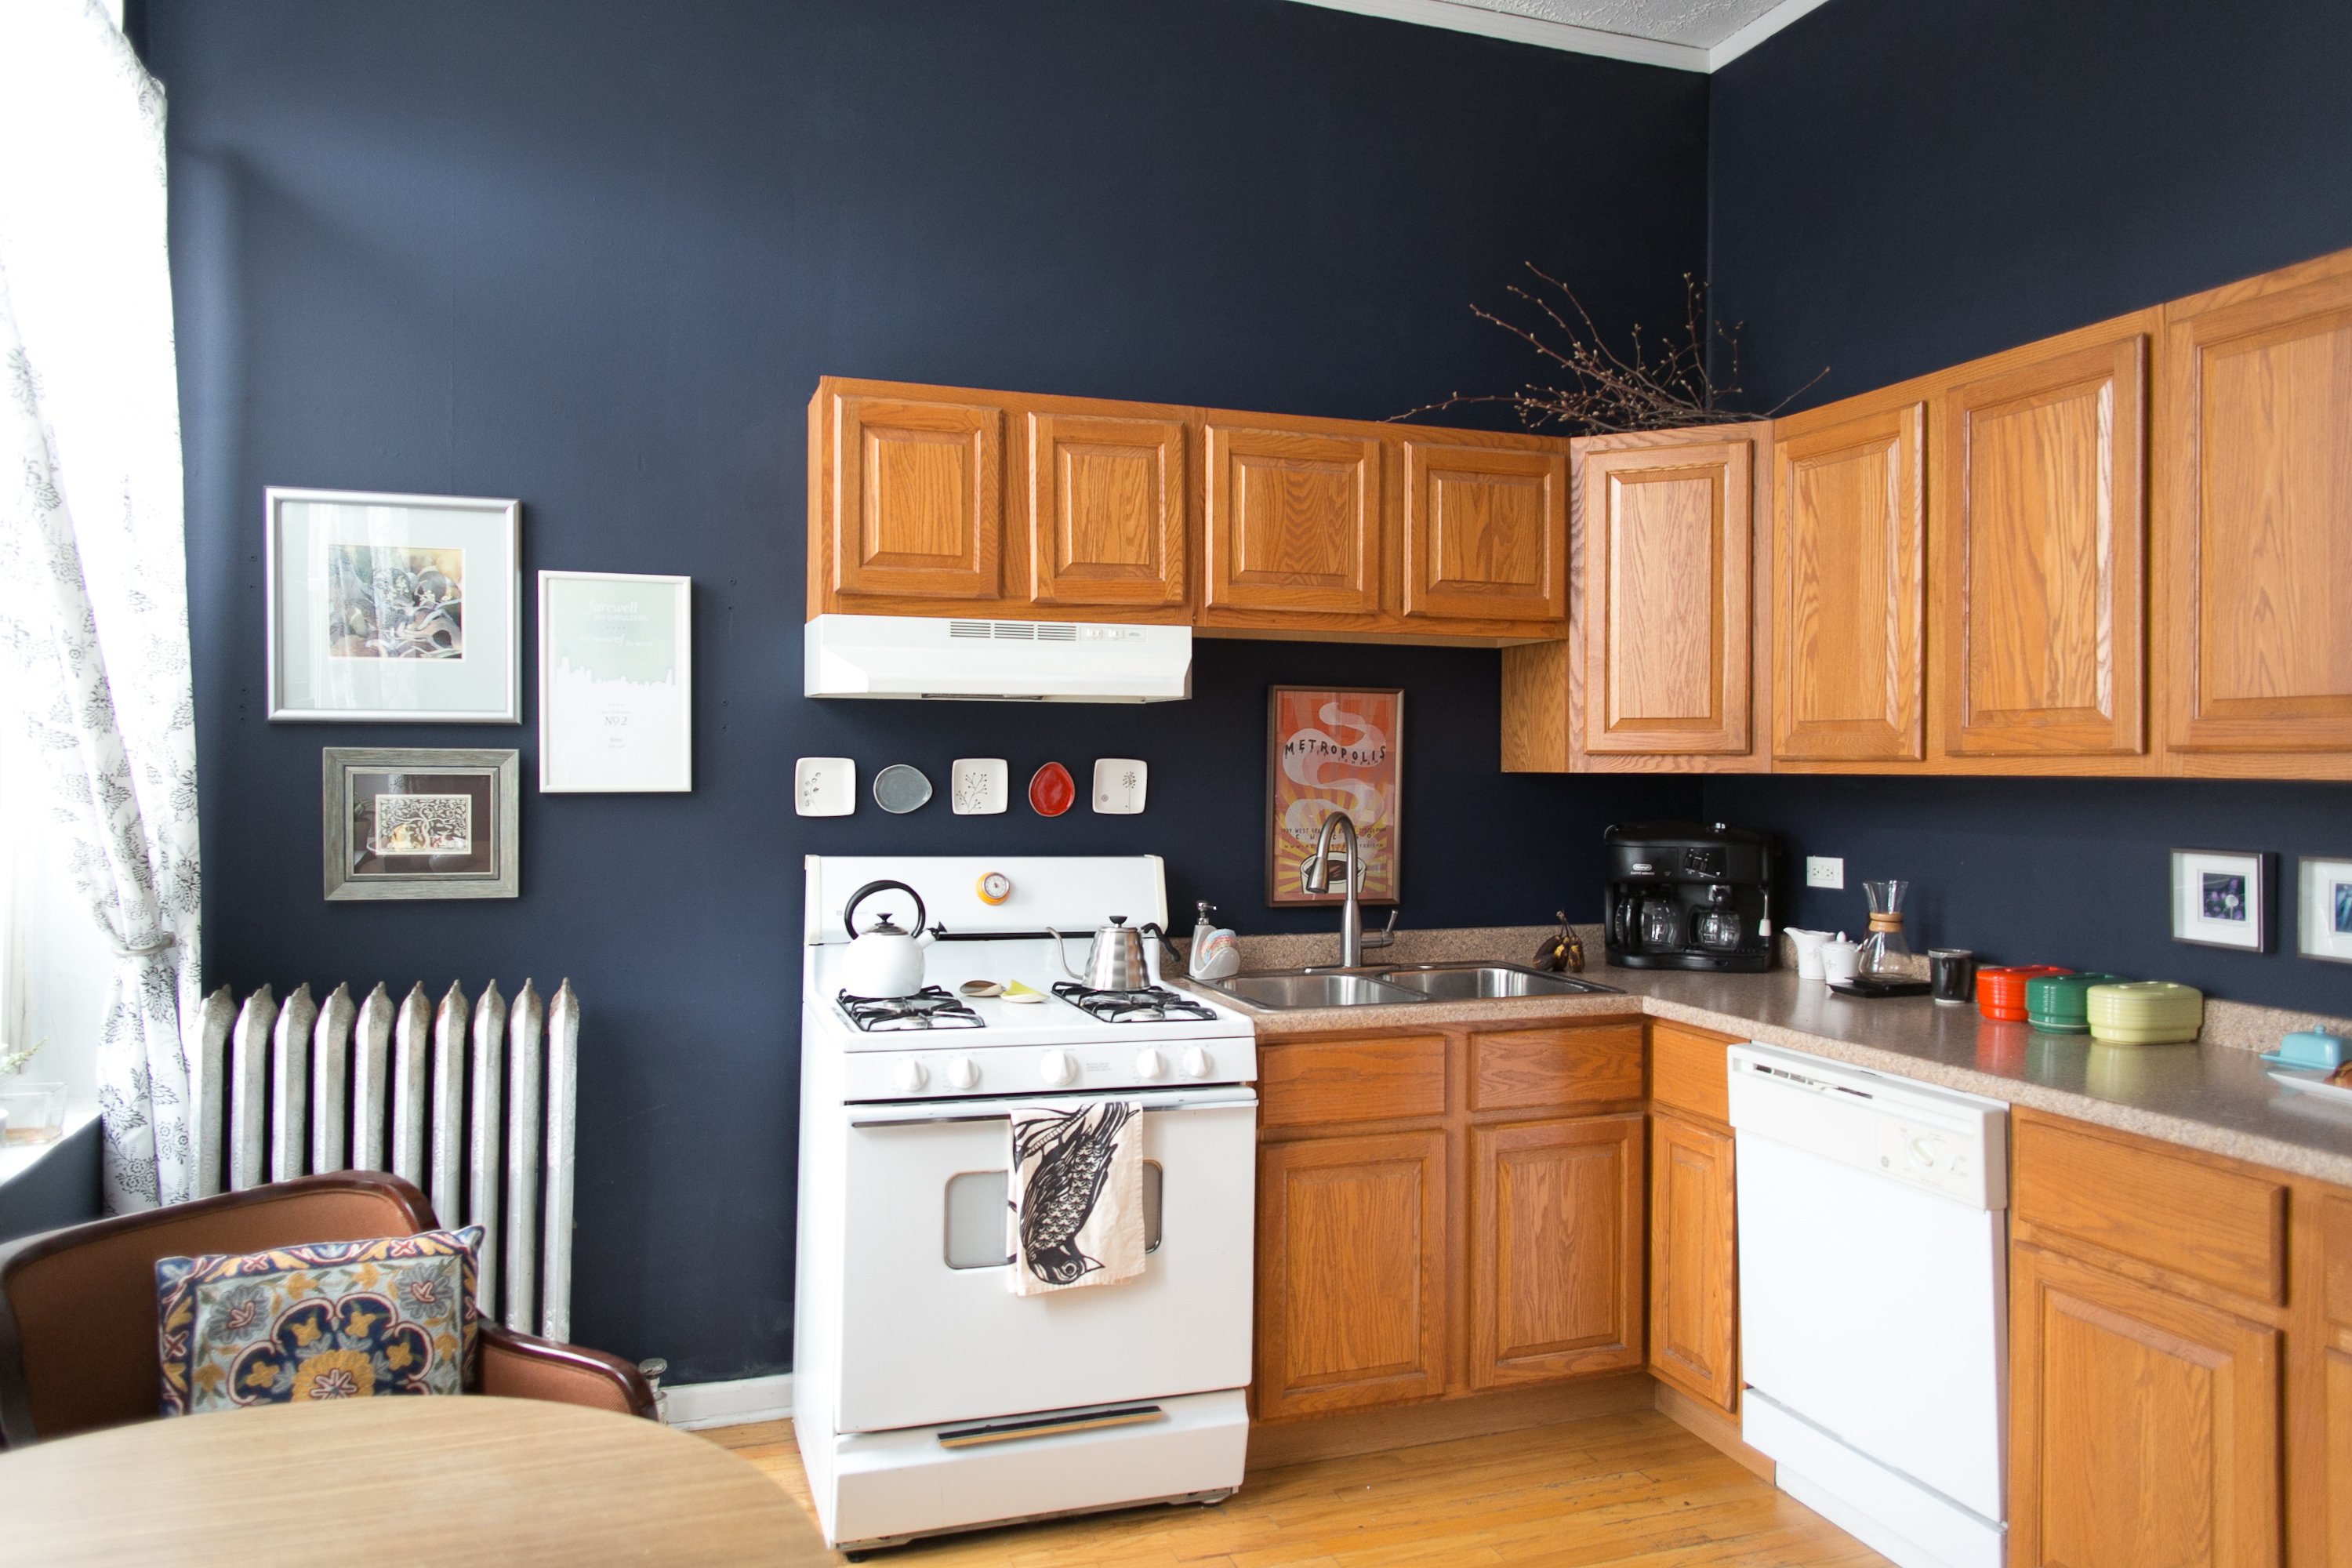 10 Of The Best Fixes For Rental Kitchen Problems Kitchn